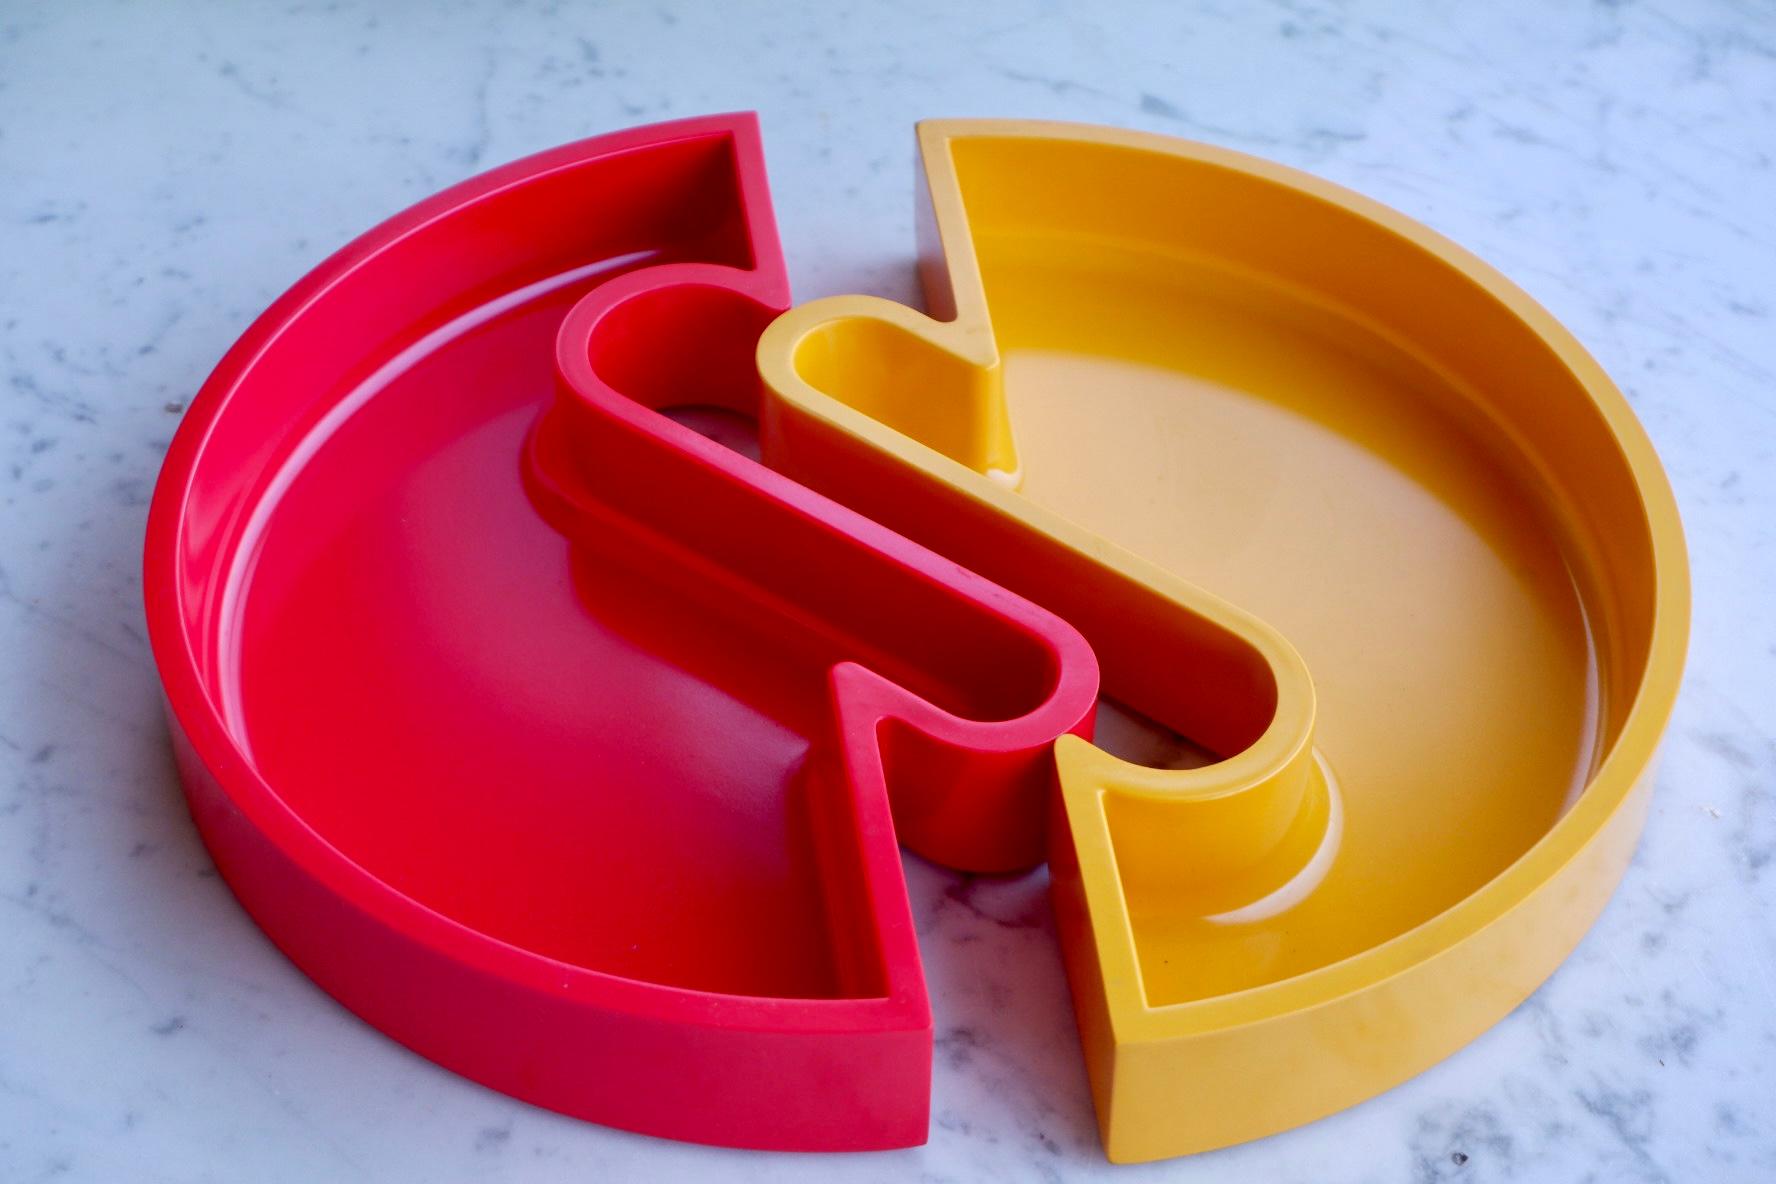 Vintage design plate of the Italian brand Lamperti designed by Seiffert & Seiffert (marked). The plate consists of two separate elements which can be put together and is made of hard yellow and red plastic. The condition is excellent.